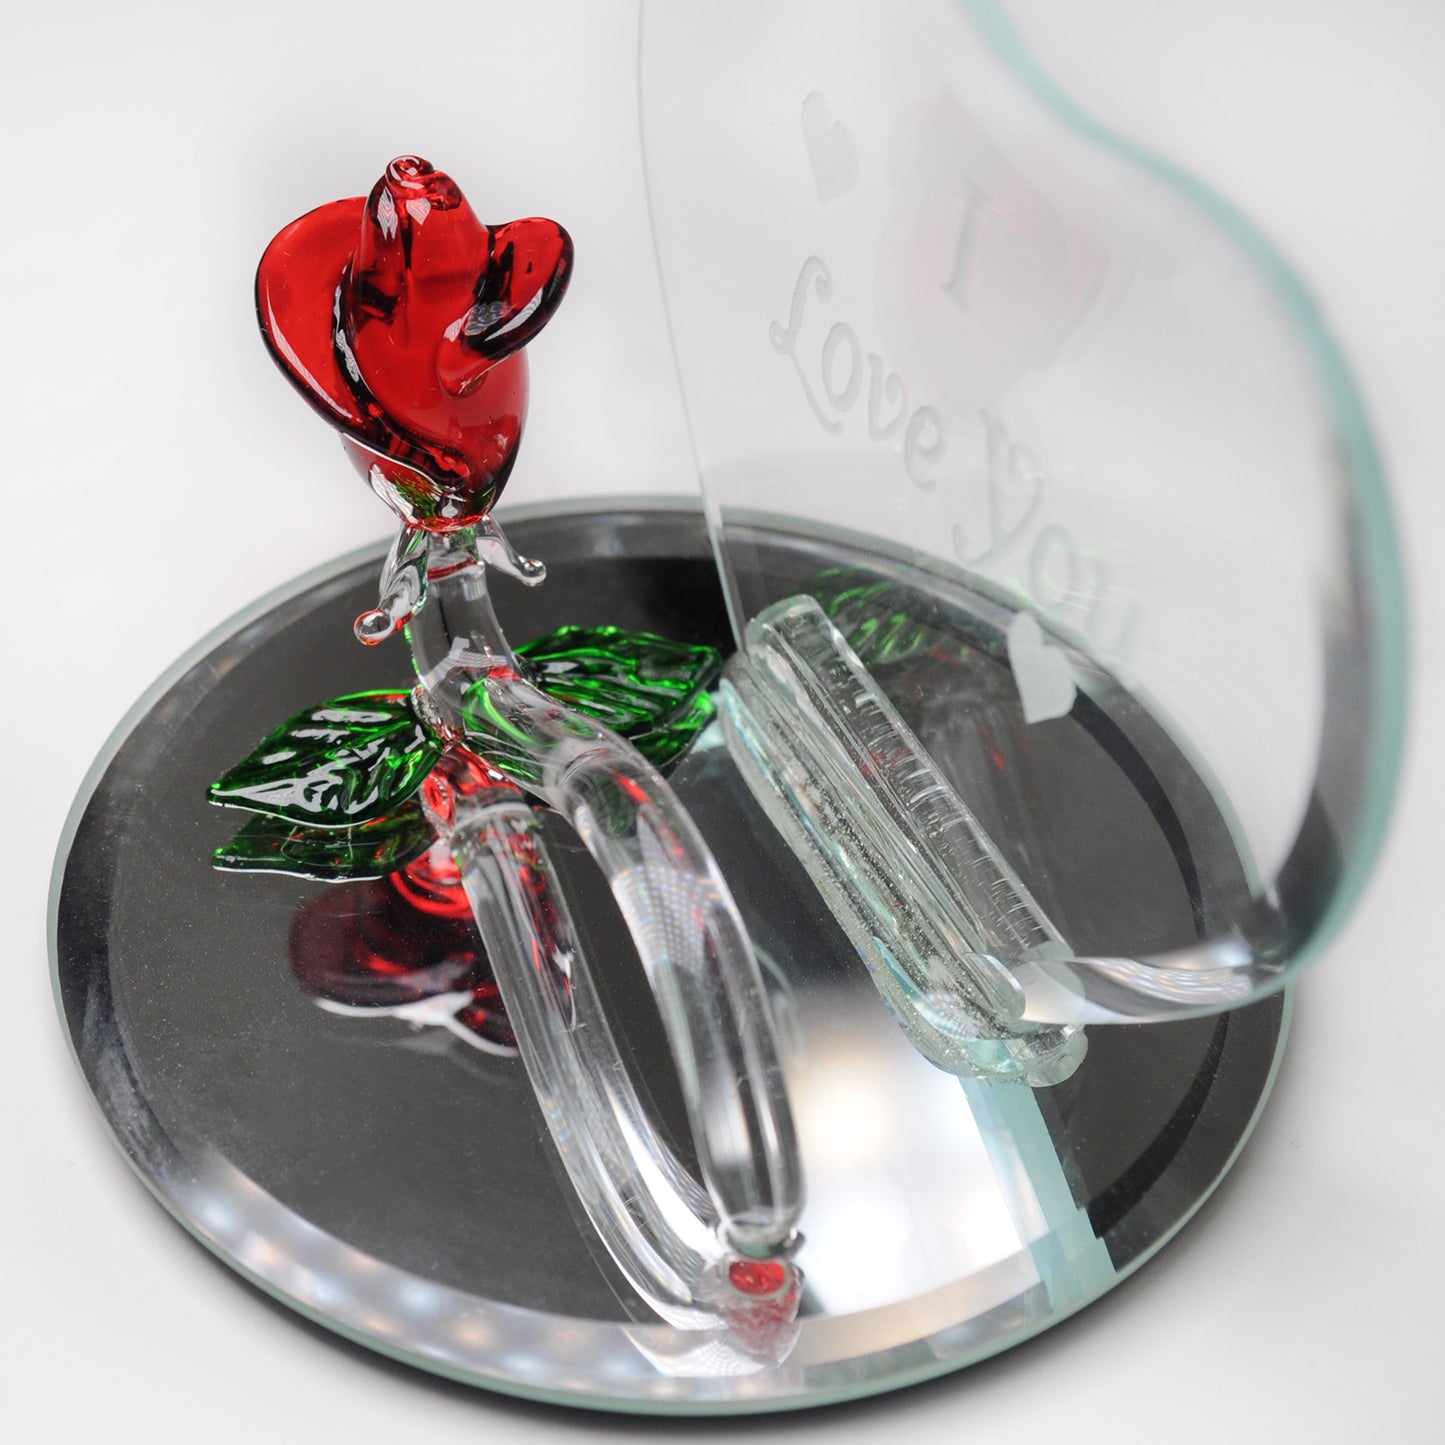 Crystal Castle Heart Shaped Glass plaque with glass rose and showcasing mirror base. The words " I love you" are engraved on the glass heart.